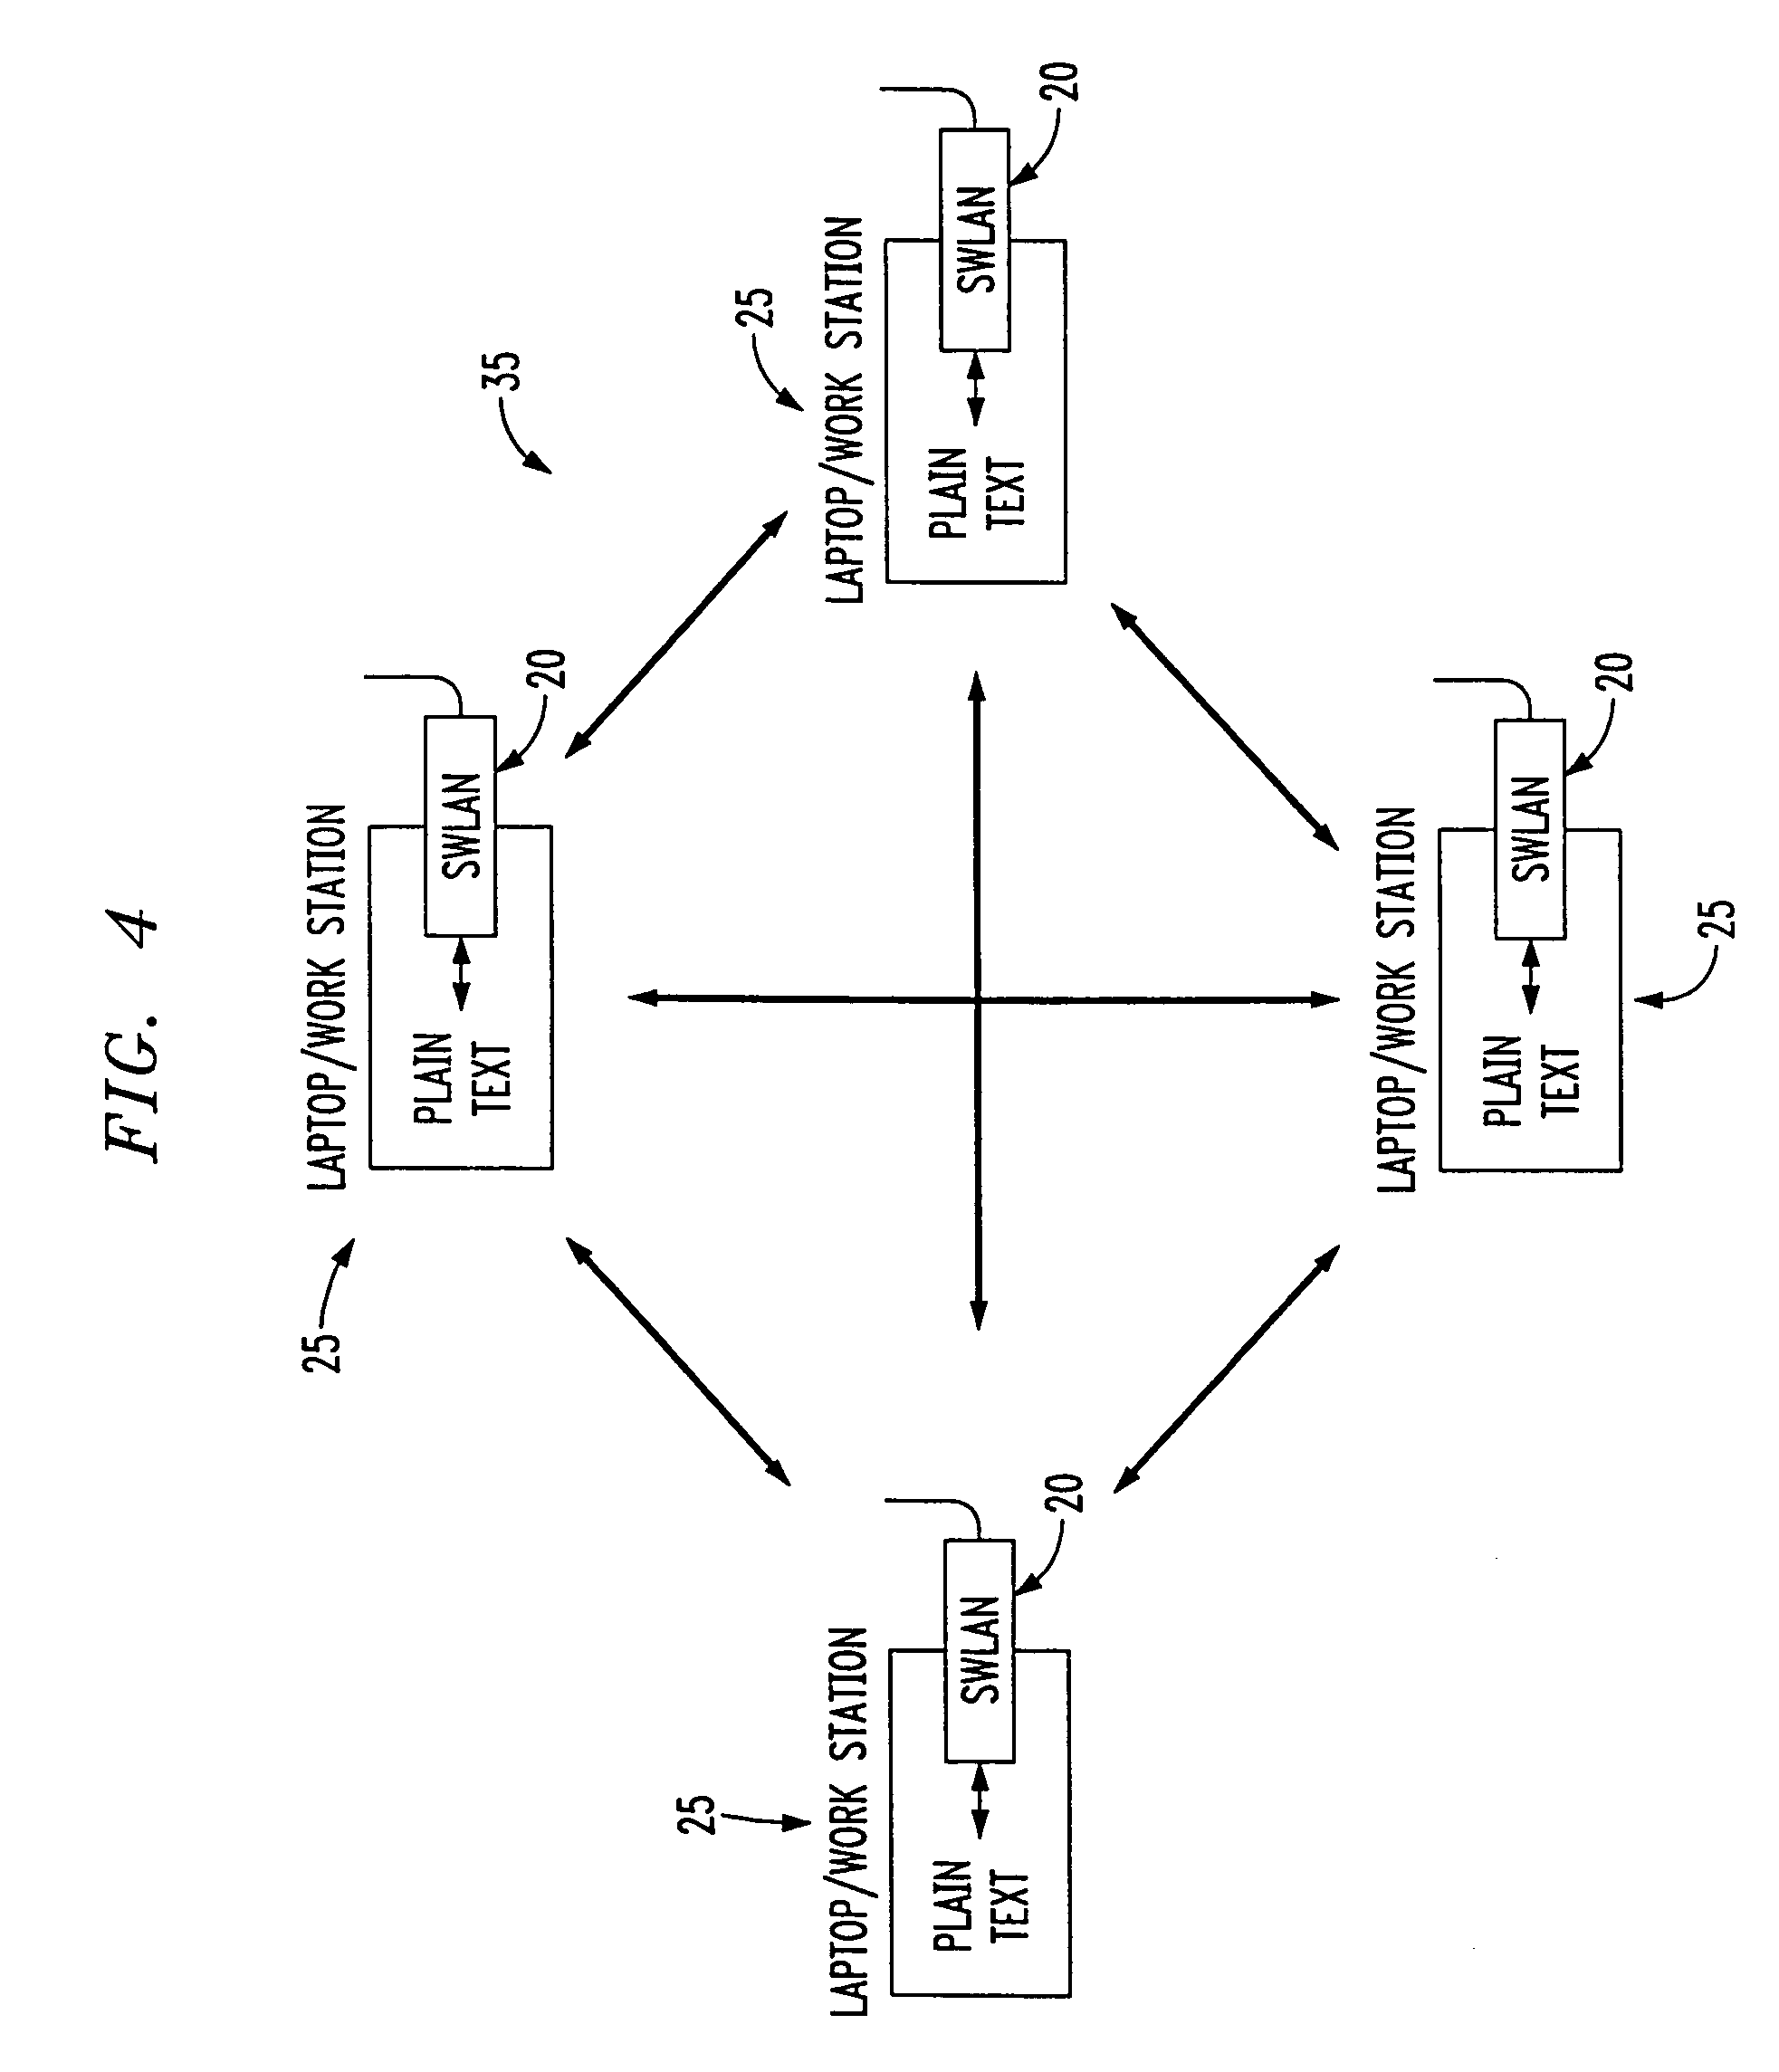 Secure wireless LAN device and associated methods